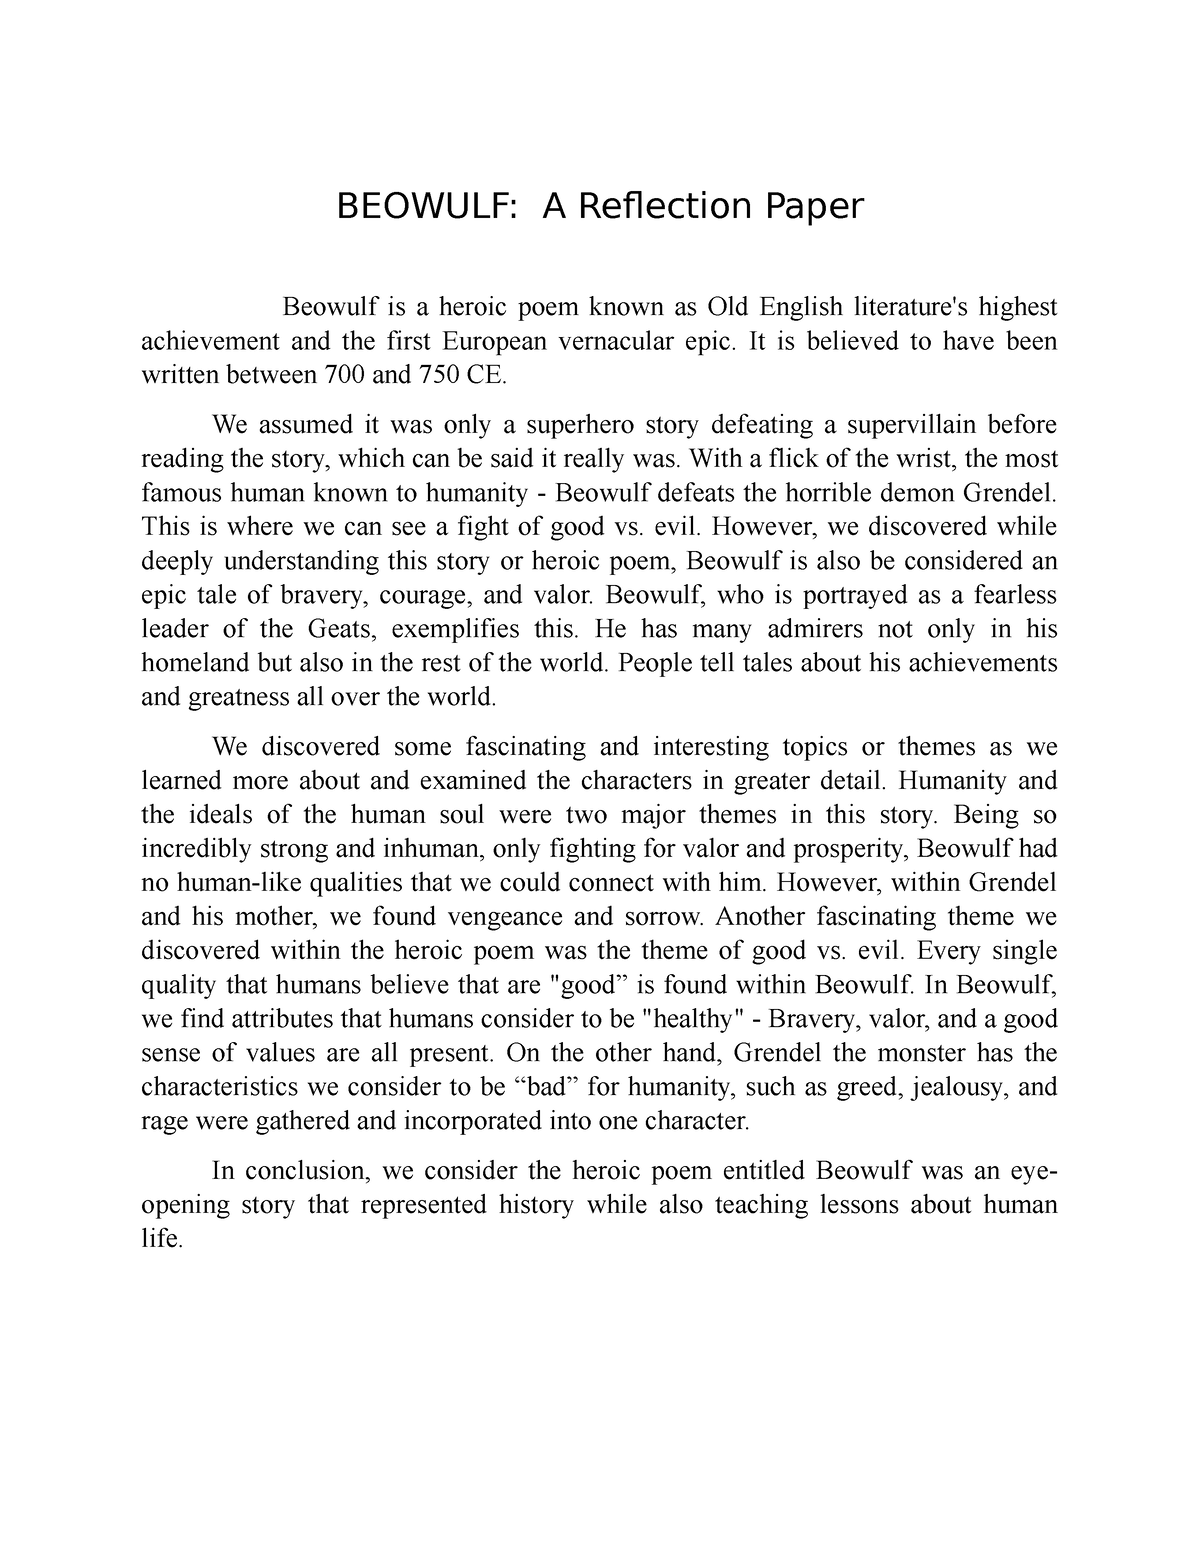 research paper on beowulf